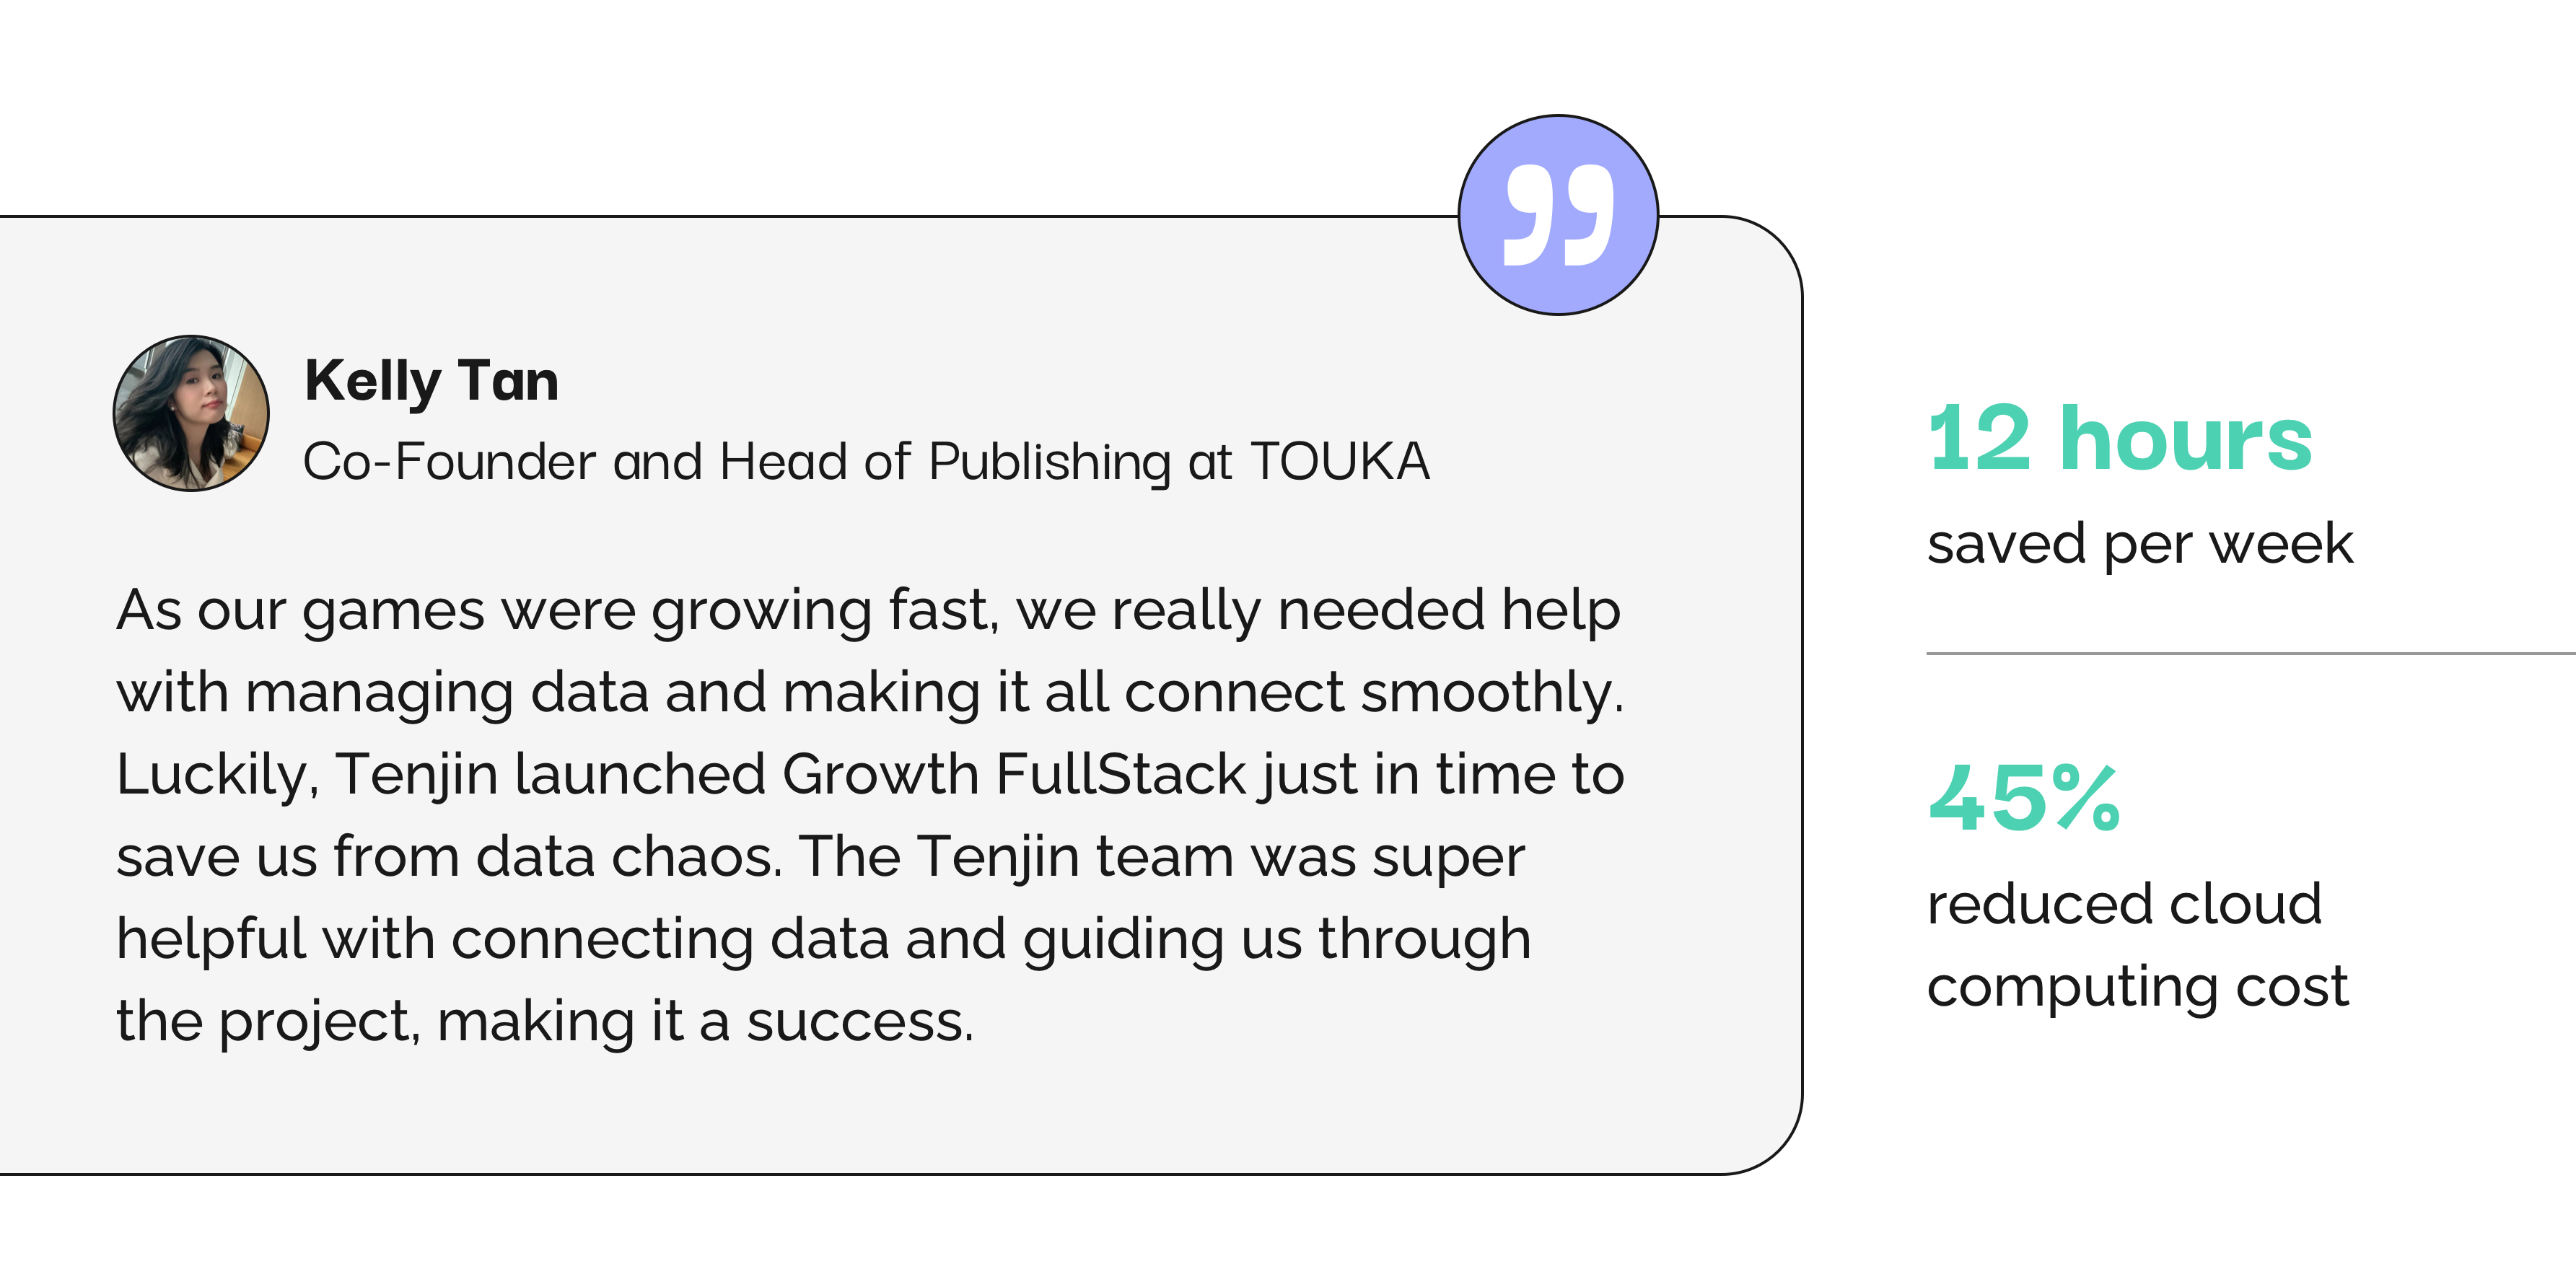 Quote on how Growth FullStack helped TOUKA Games from data chaos